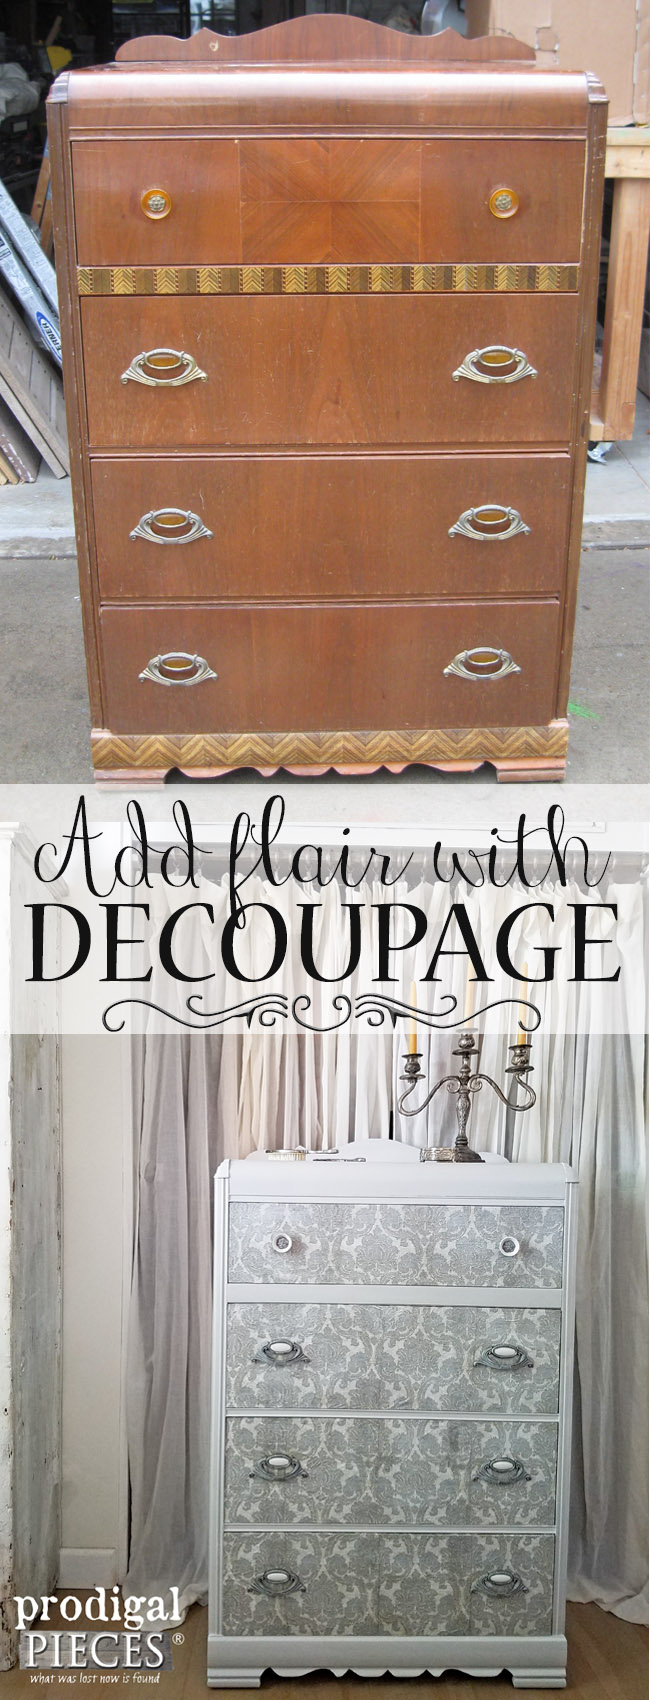 Add Flair to Your Furniture with Decoupage ~ DIY Tutorial by Prodigal Pieces | www.prodigalpieces.com